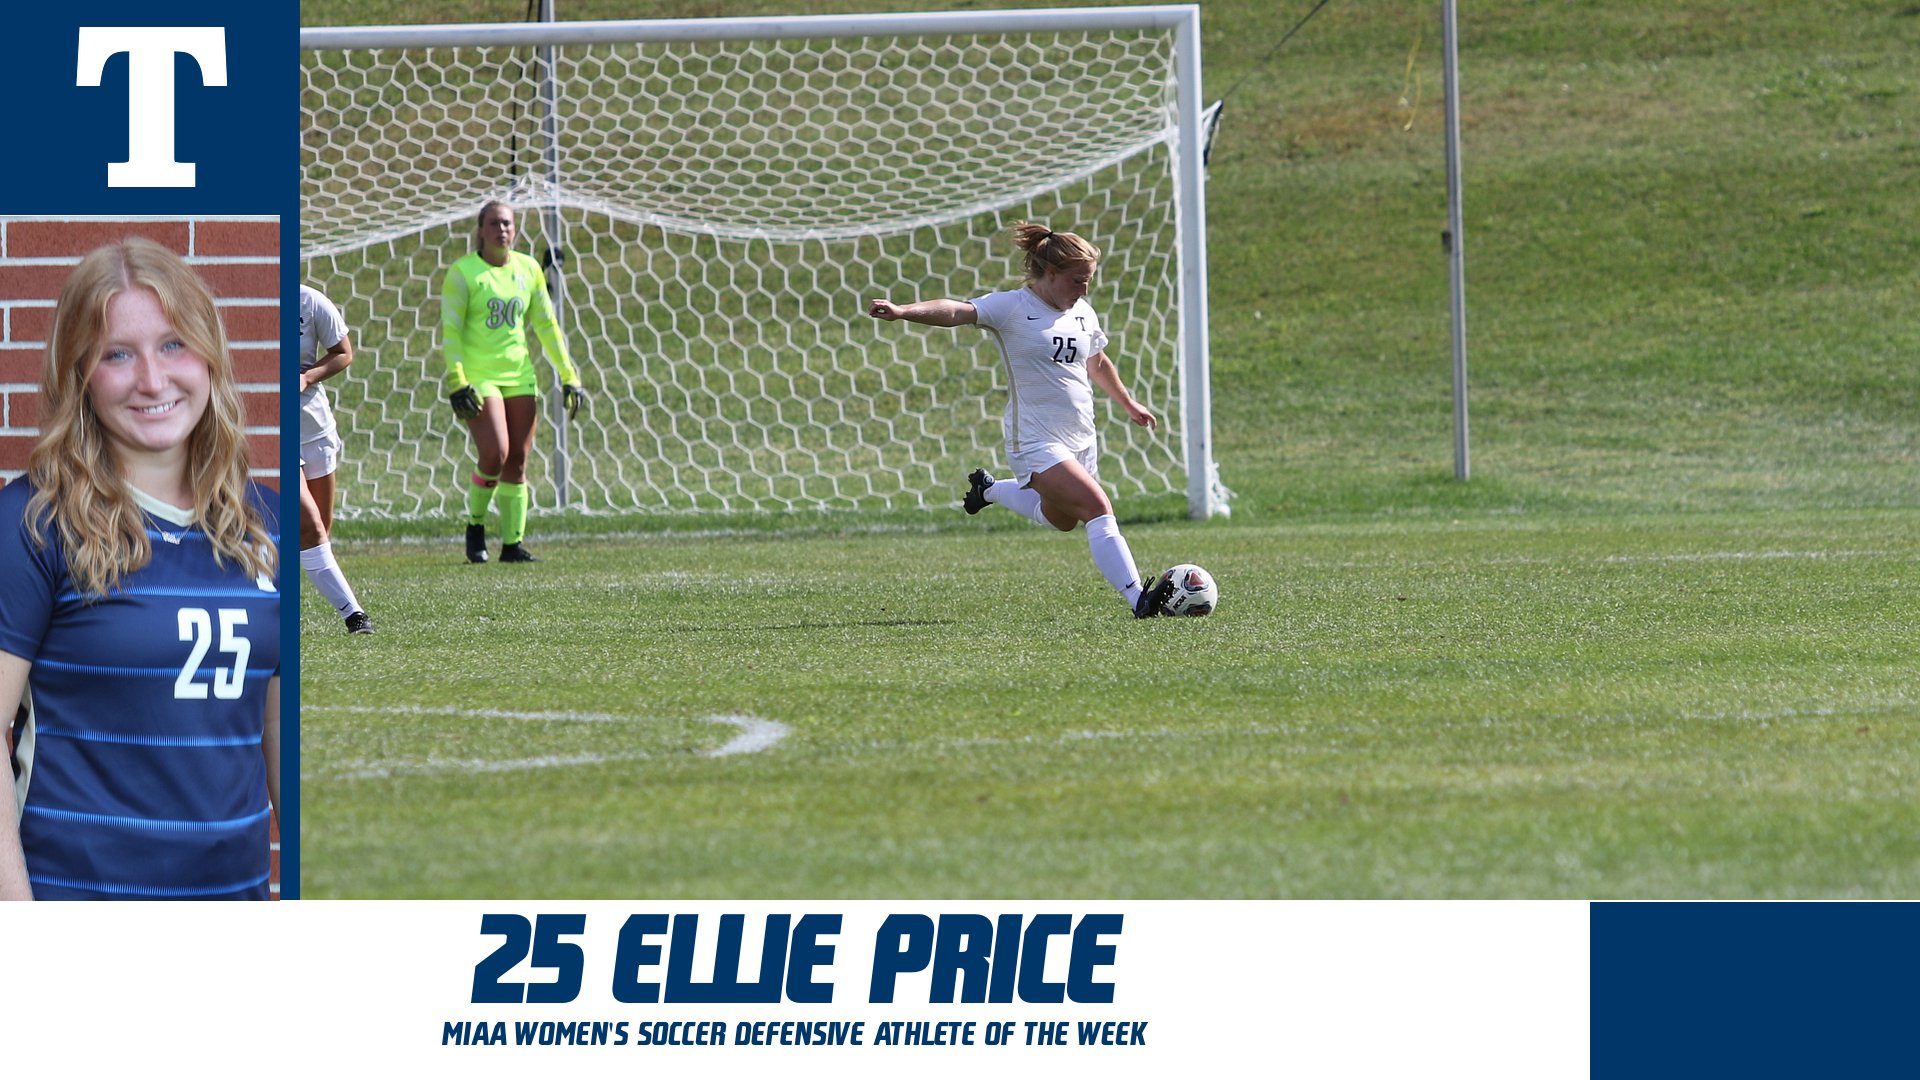 Ellie Price Makes it Back-To-Back Athlete of the Week Awards for Trine Women's Soccer